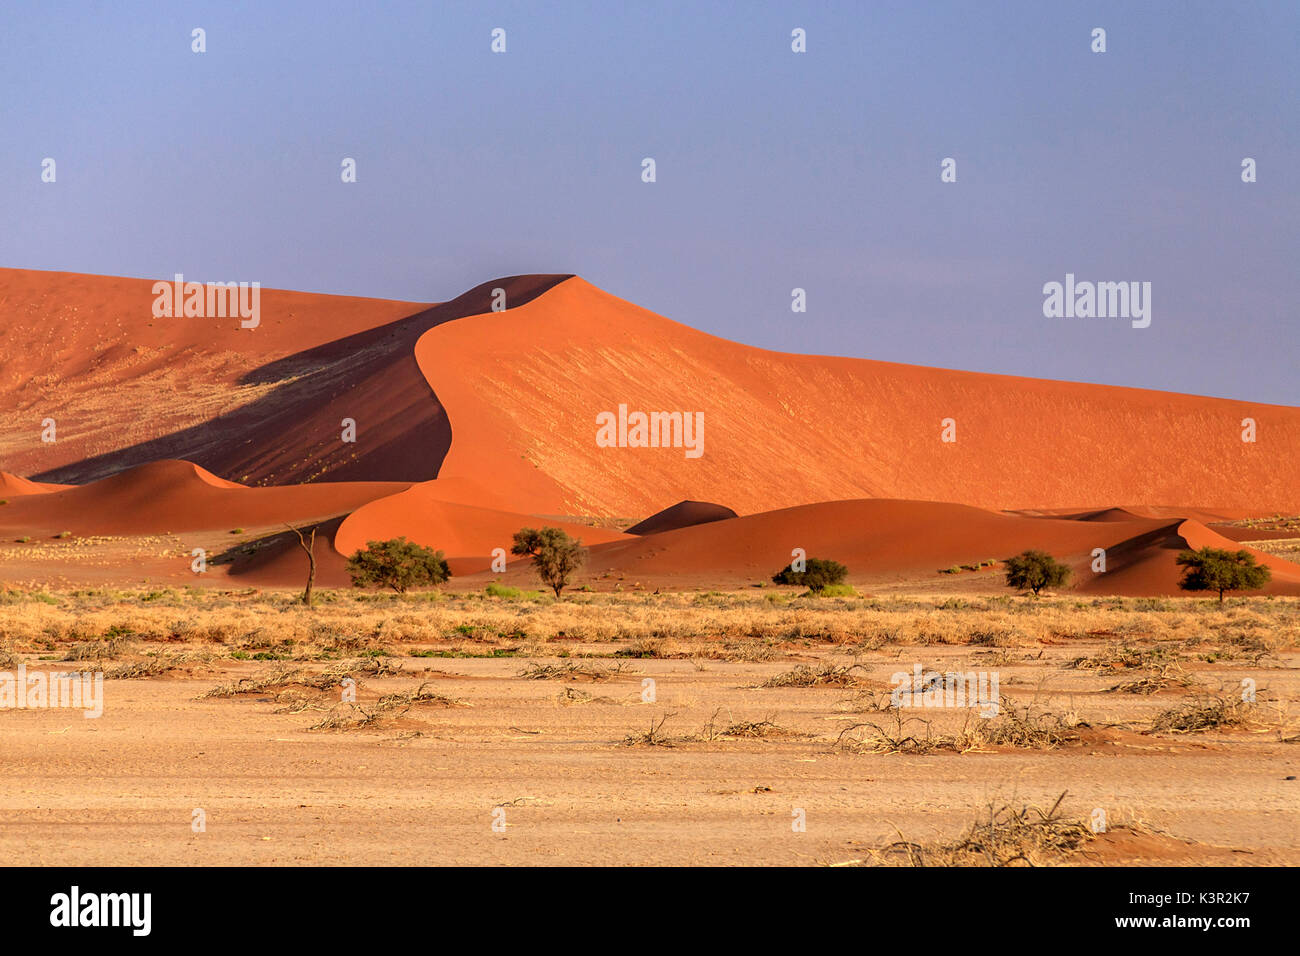 Dry plants and Dead Acacia surrounded by sandy dunes Deadvlei Sossusvlei Namib Desert Naukluft National Park Namibia Africa Stock Photo